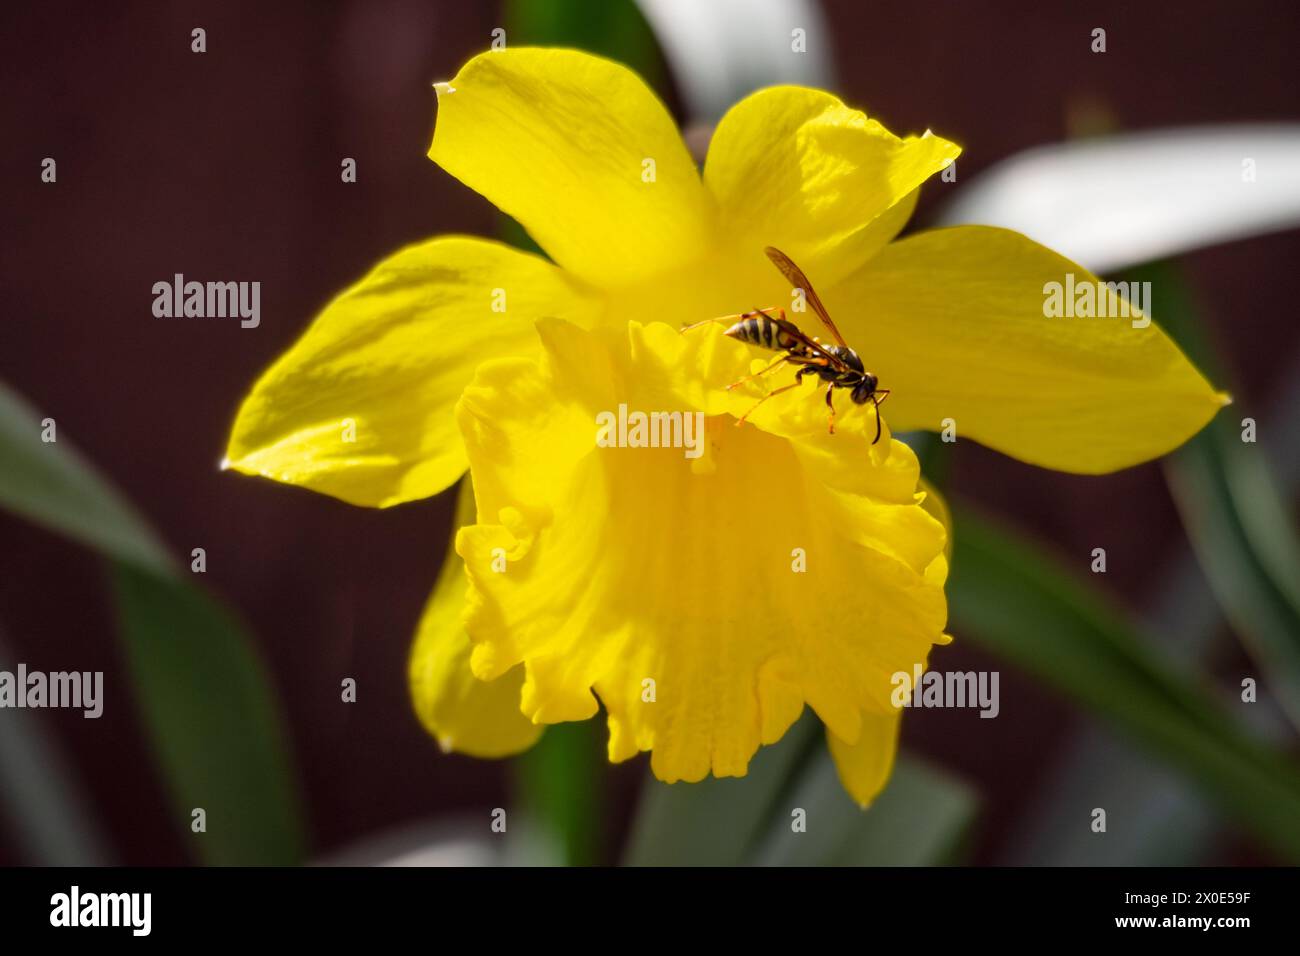 A wasp is out hunting for a meal on a daffodil during the warm spring afternoon. Stock Photo